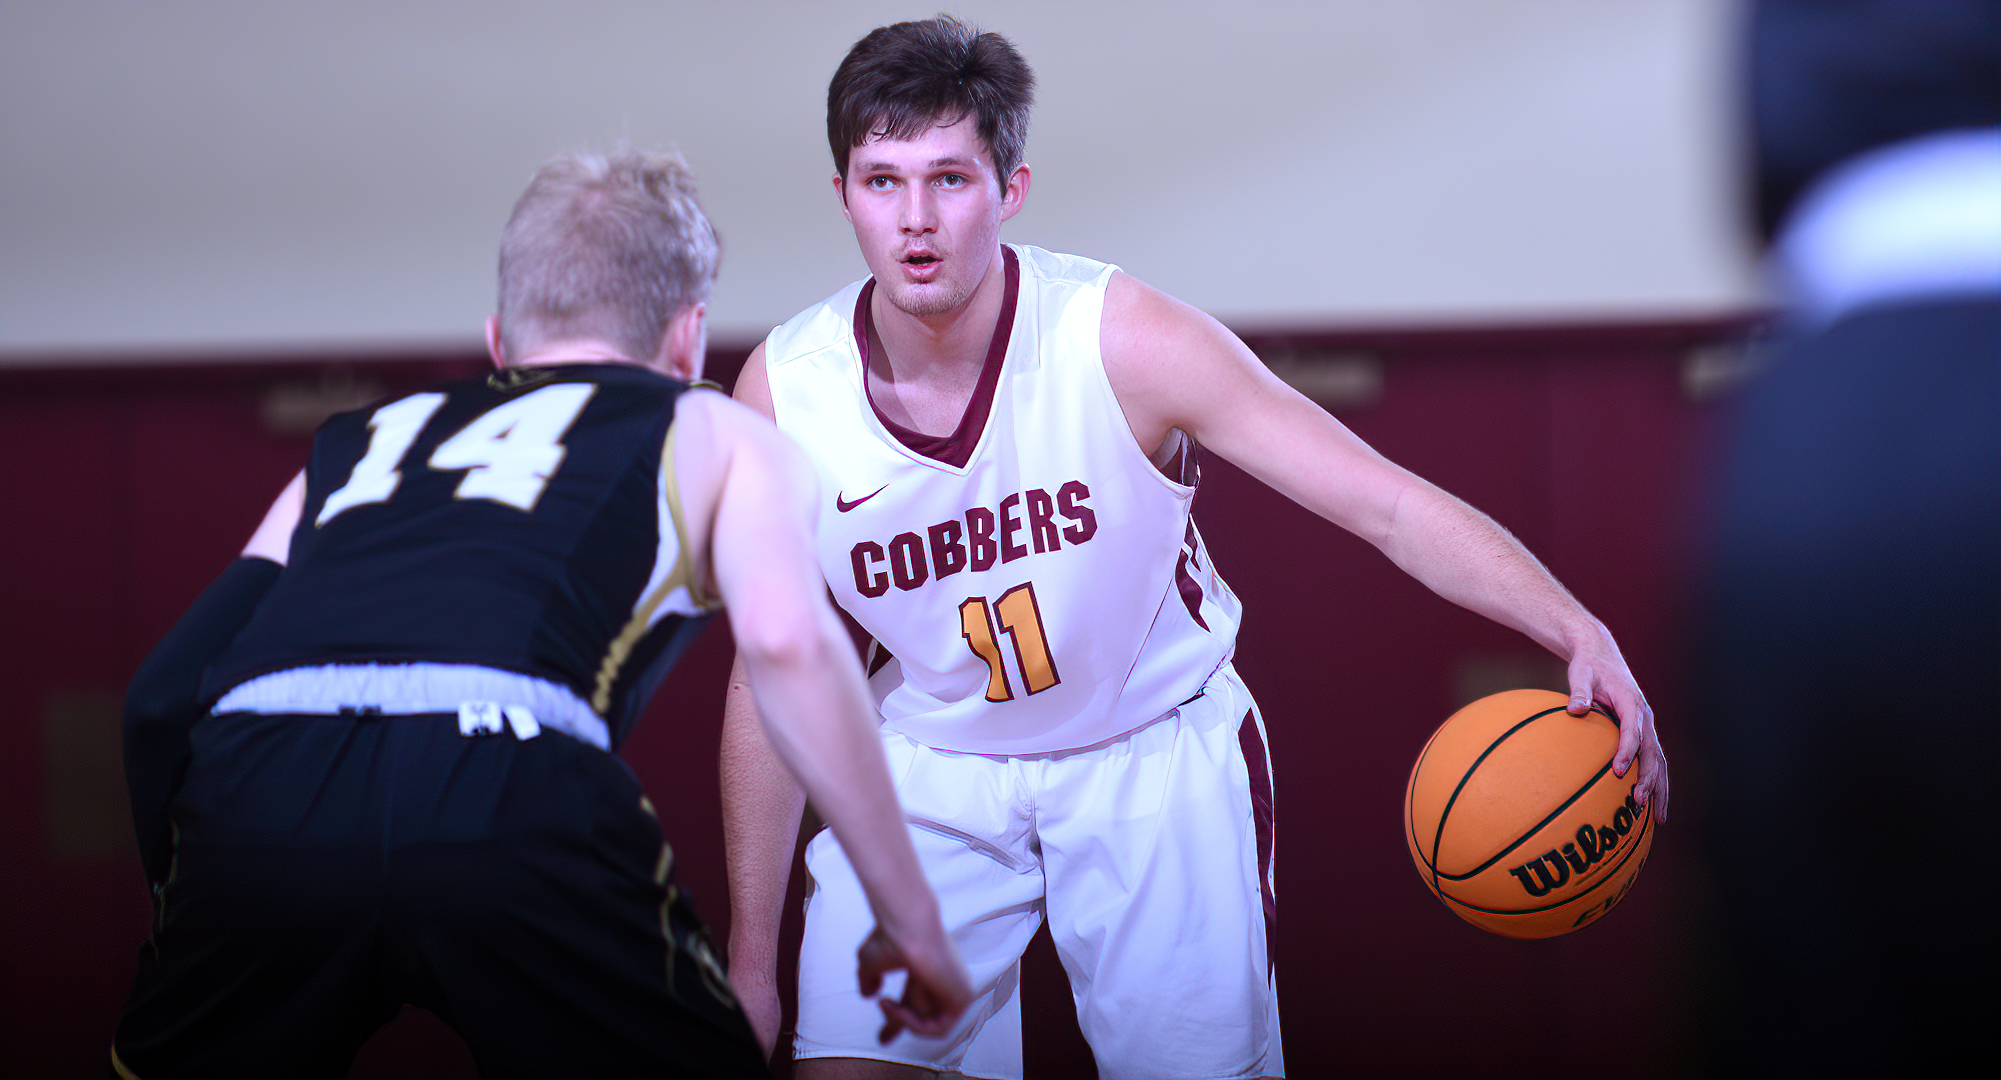 Braeton Motschenbacher He went 8-for-14 from the floor to record his third 20-or-more-point game of the season in the Cobbers' game at St. Olaf.